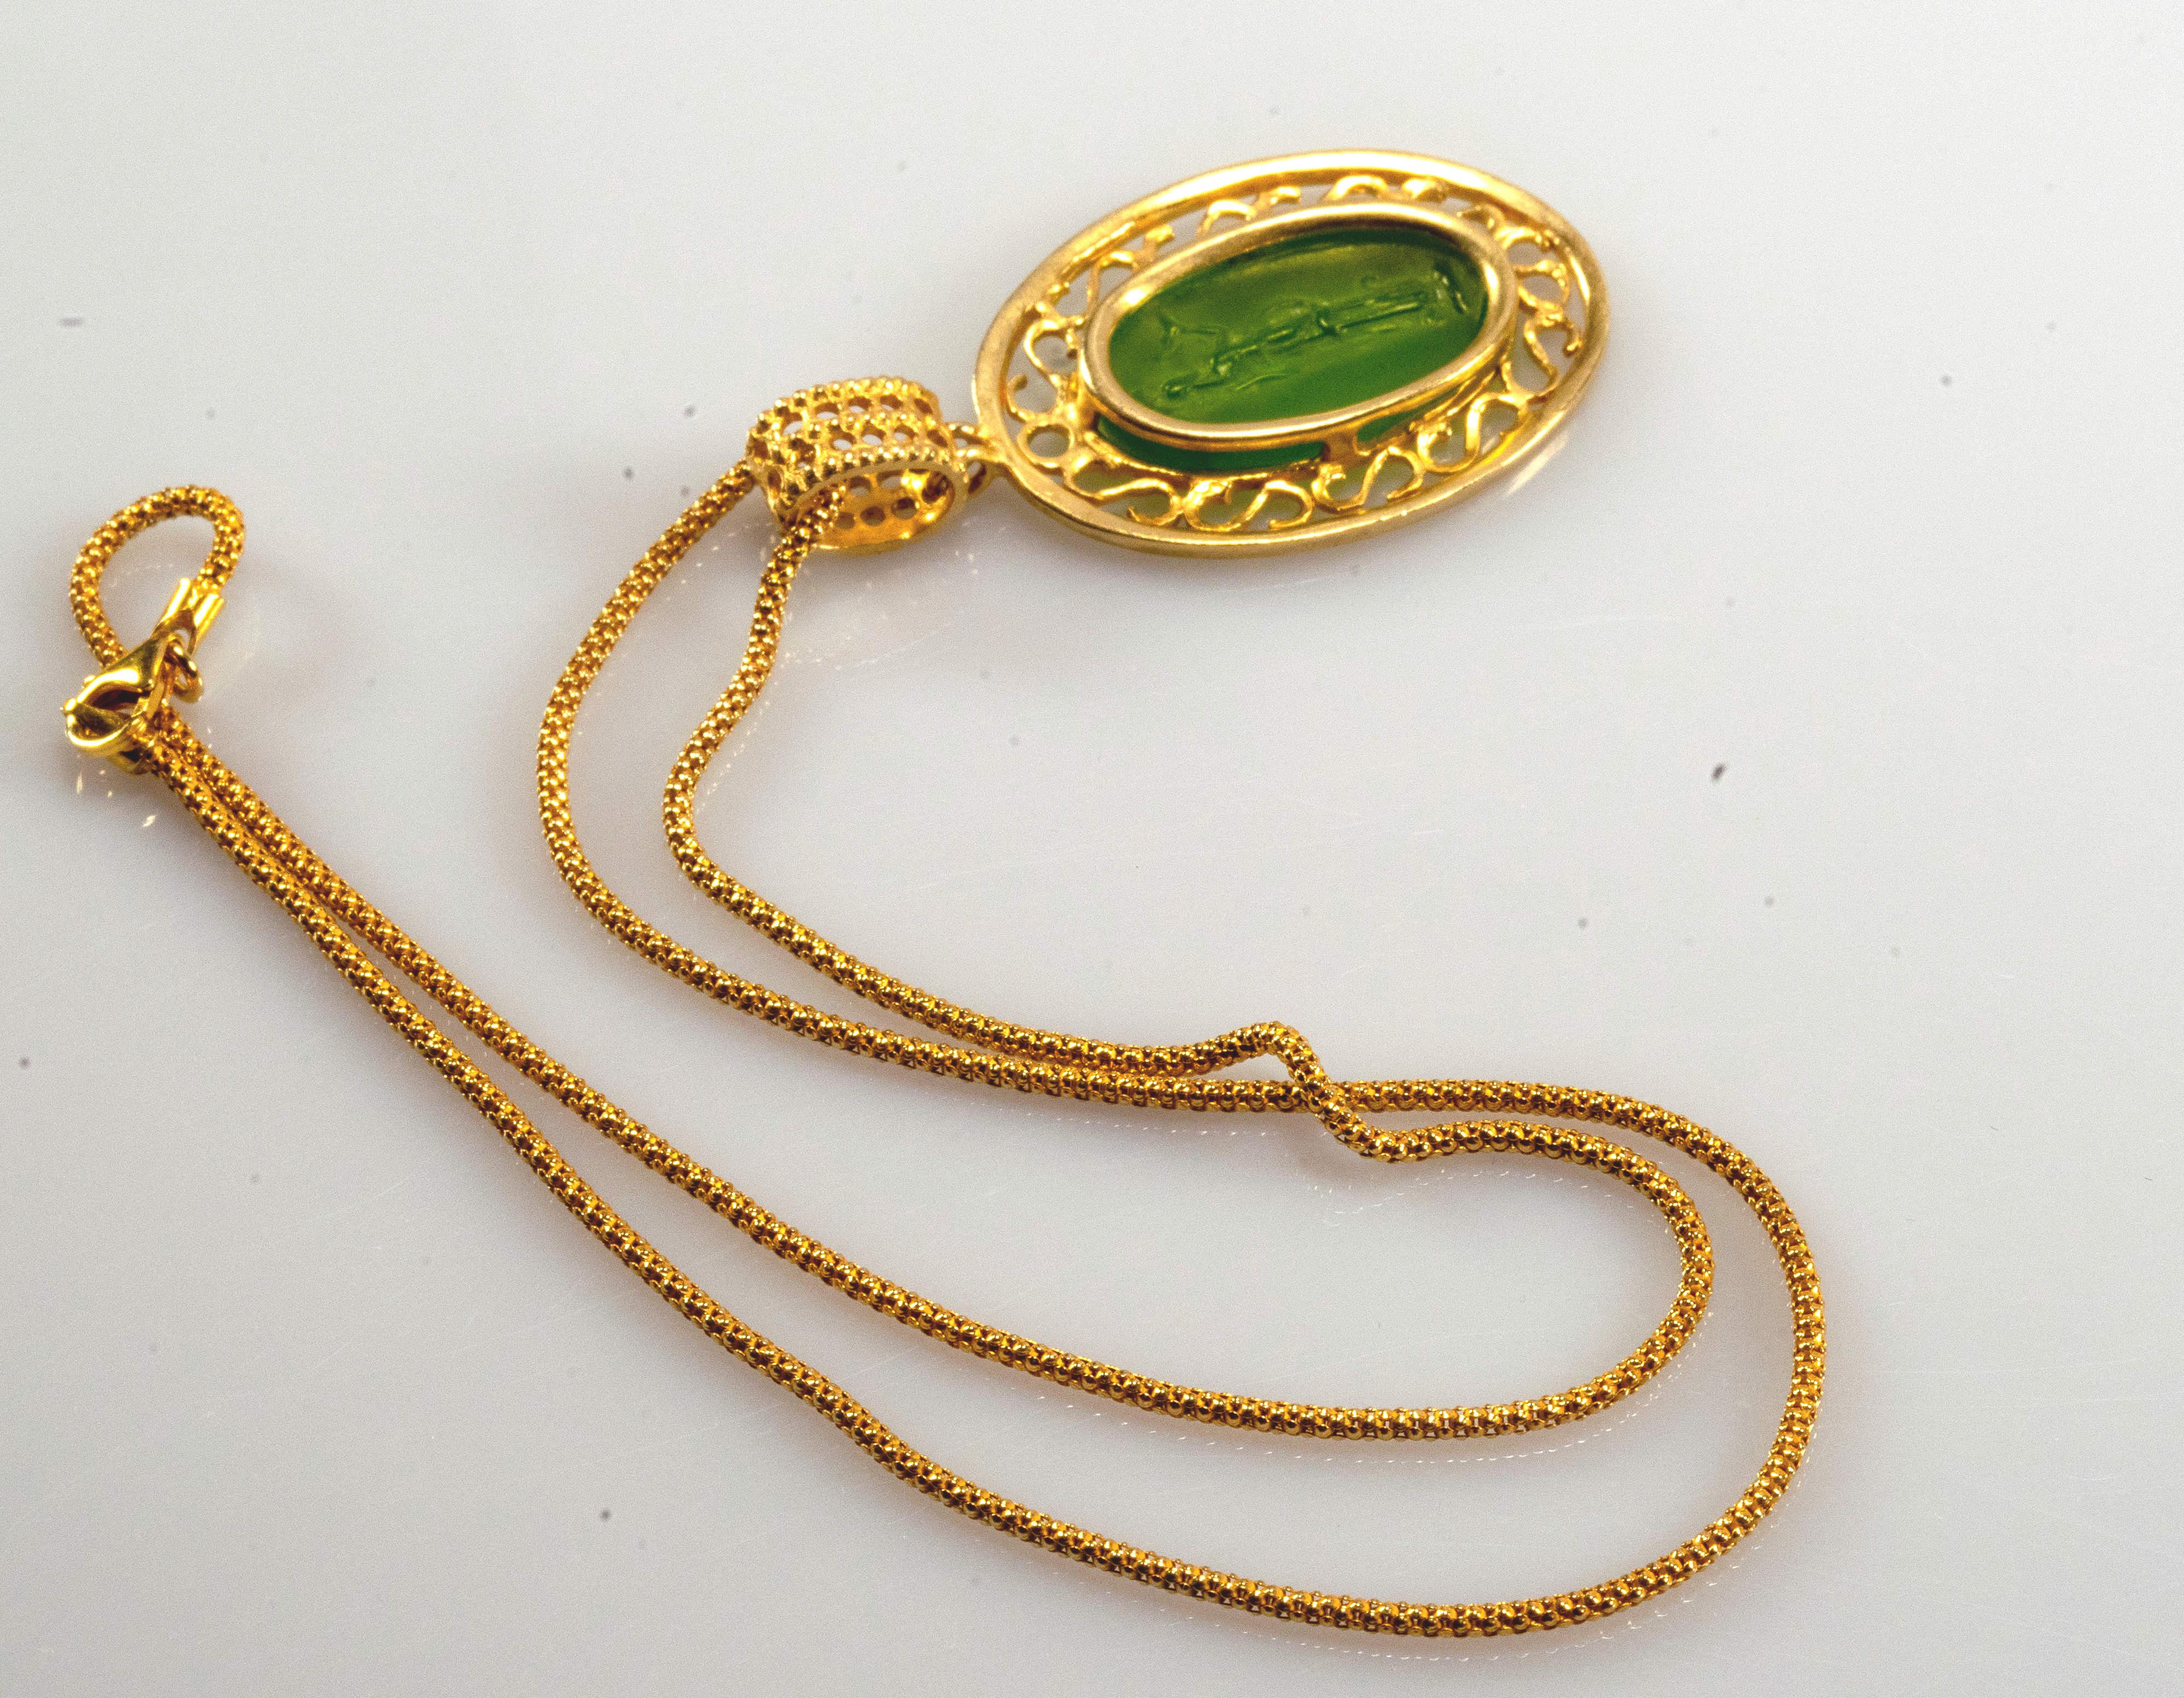 Gilded Silver Necklace Green Glass Paste Cameo Etruscan Jewelry Style In Excellent Condition For Sale In Rome, IT